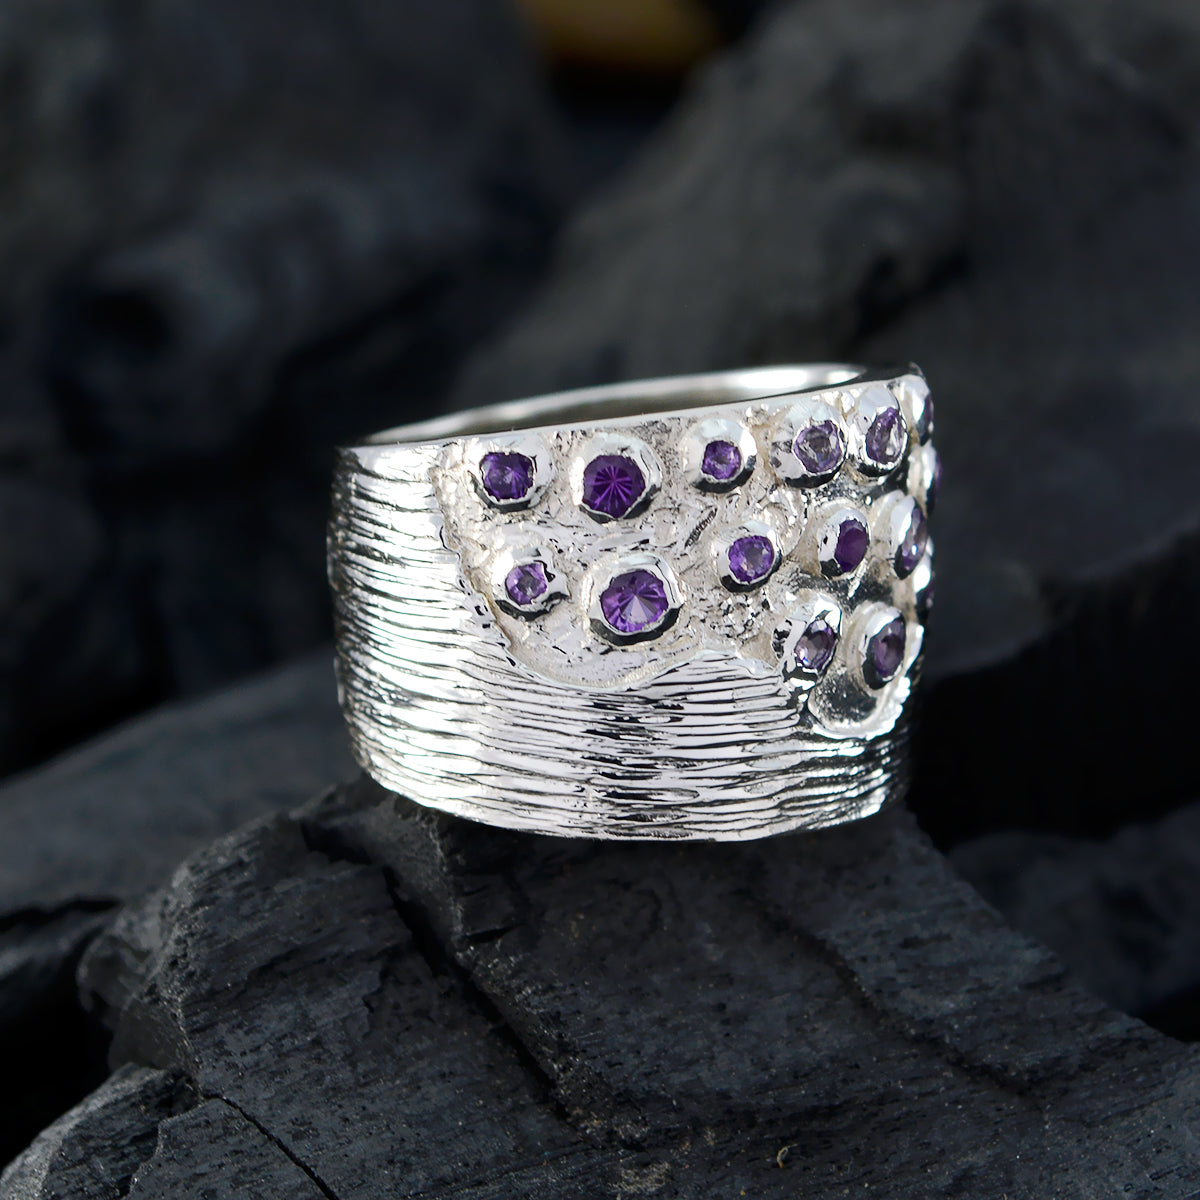 Marvelous Gem Amethyst Sterling Silver Ring Closest Jewelry Store